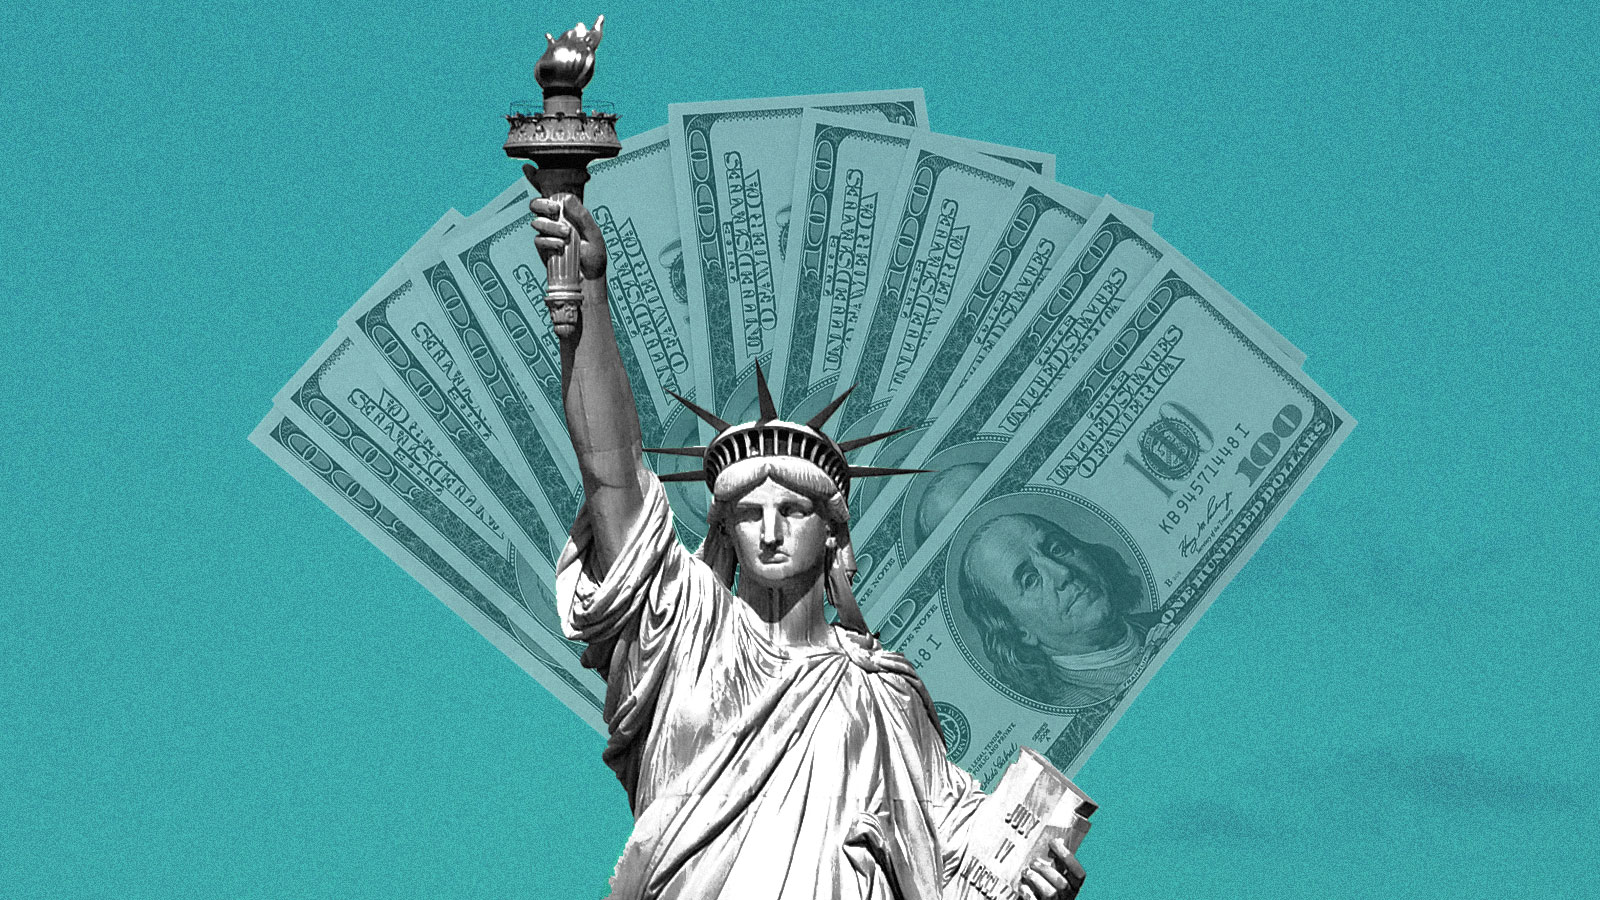 A picture of the Statue of liberty with $100 dollar bills fanned out behind her